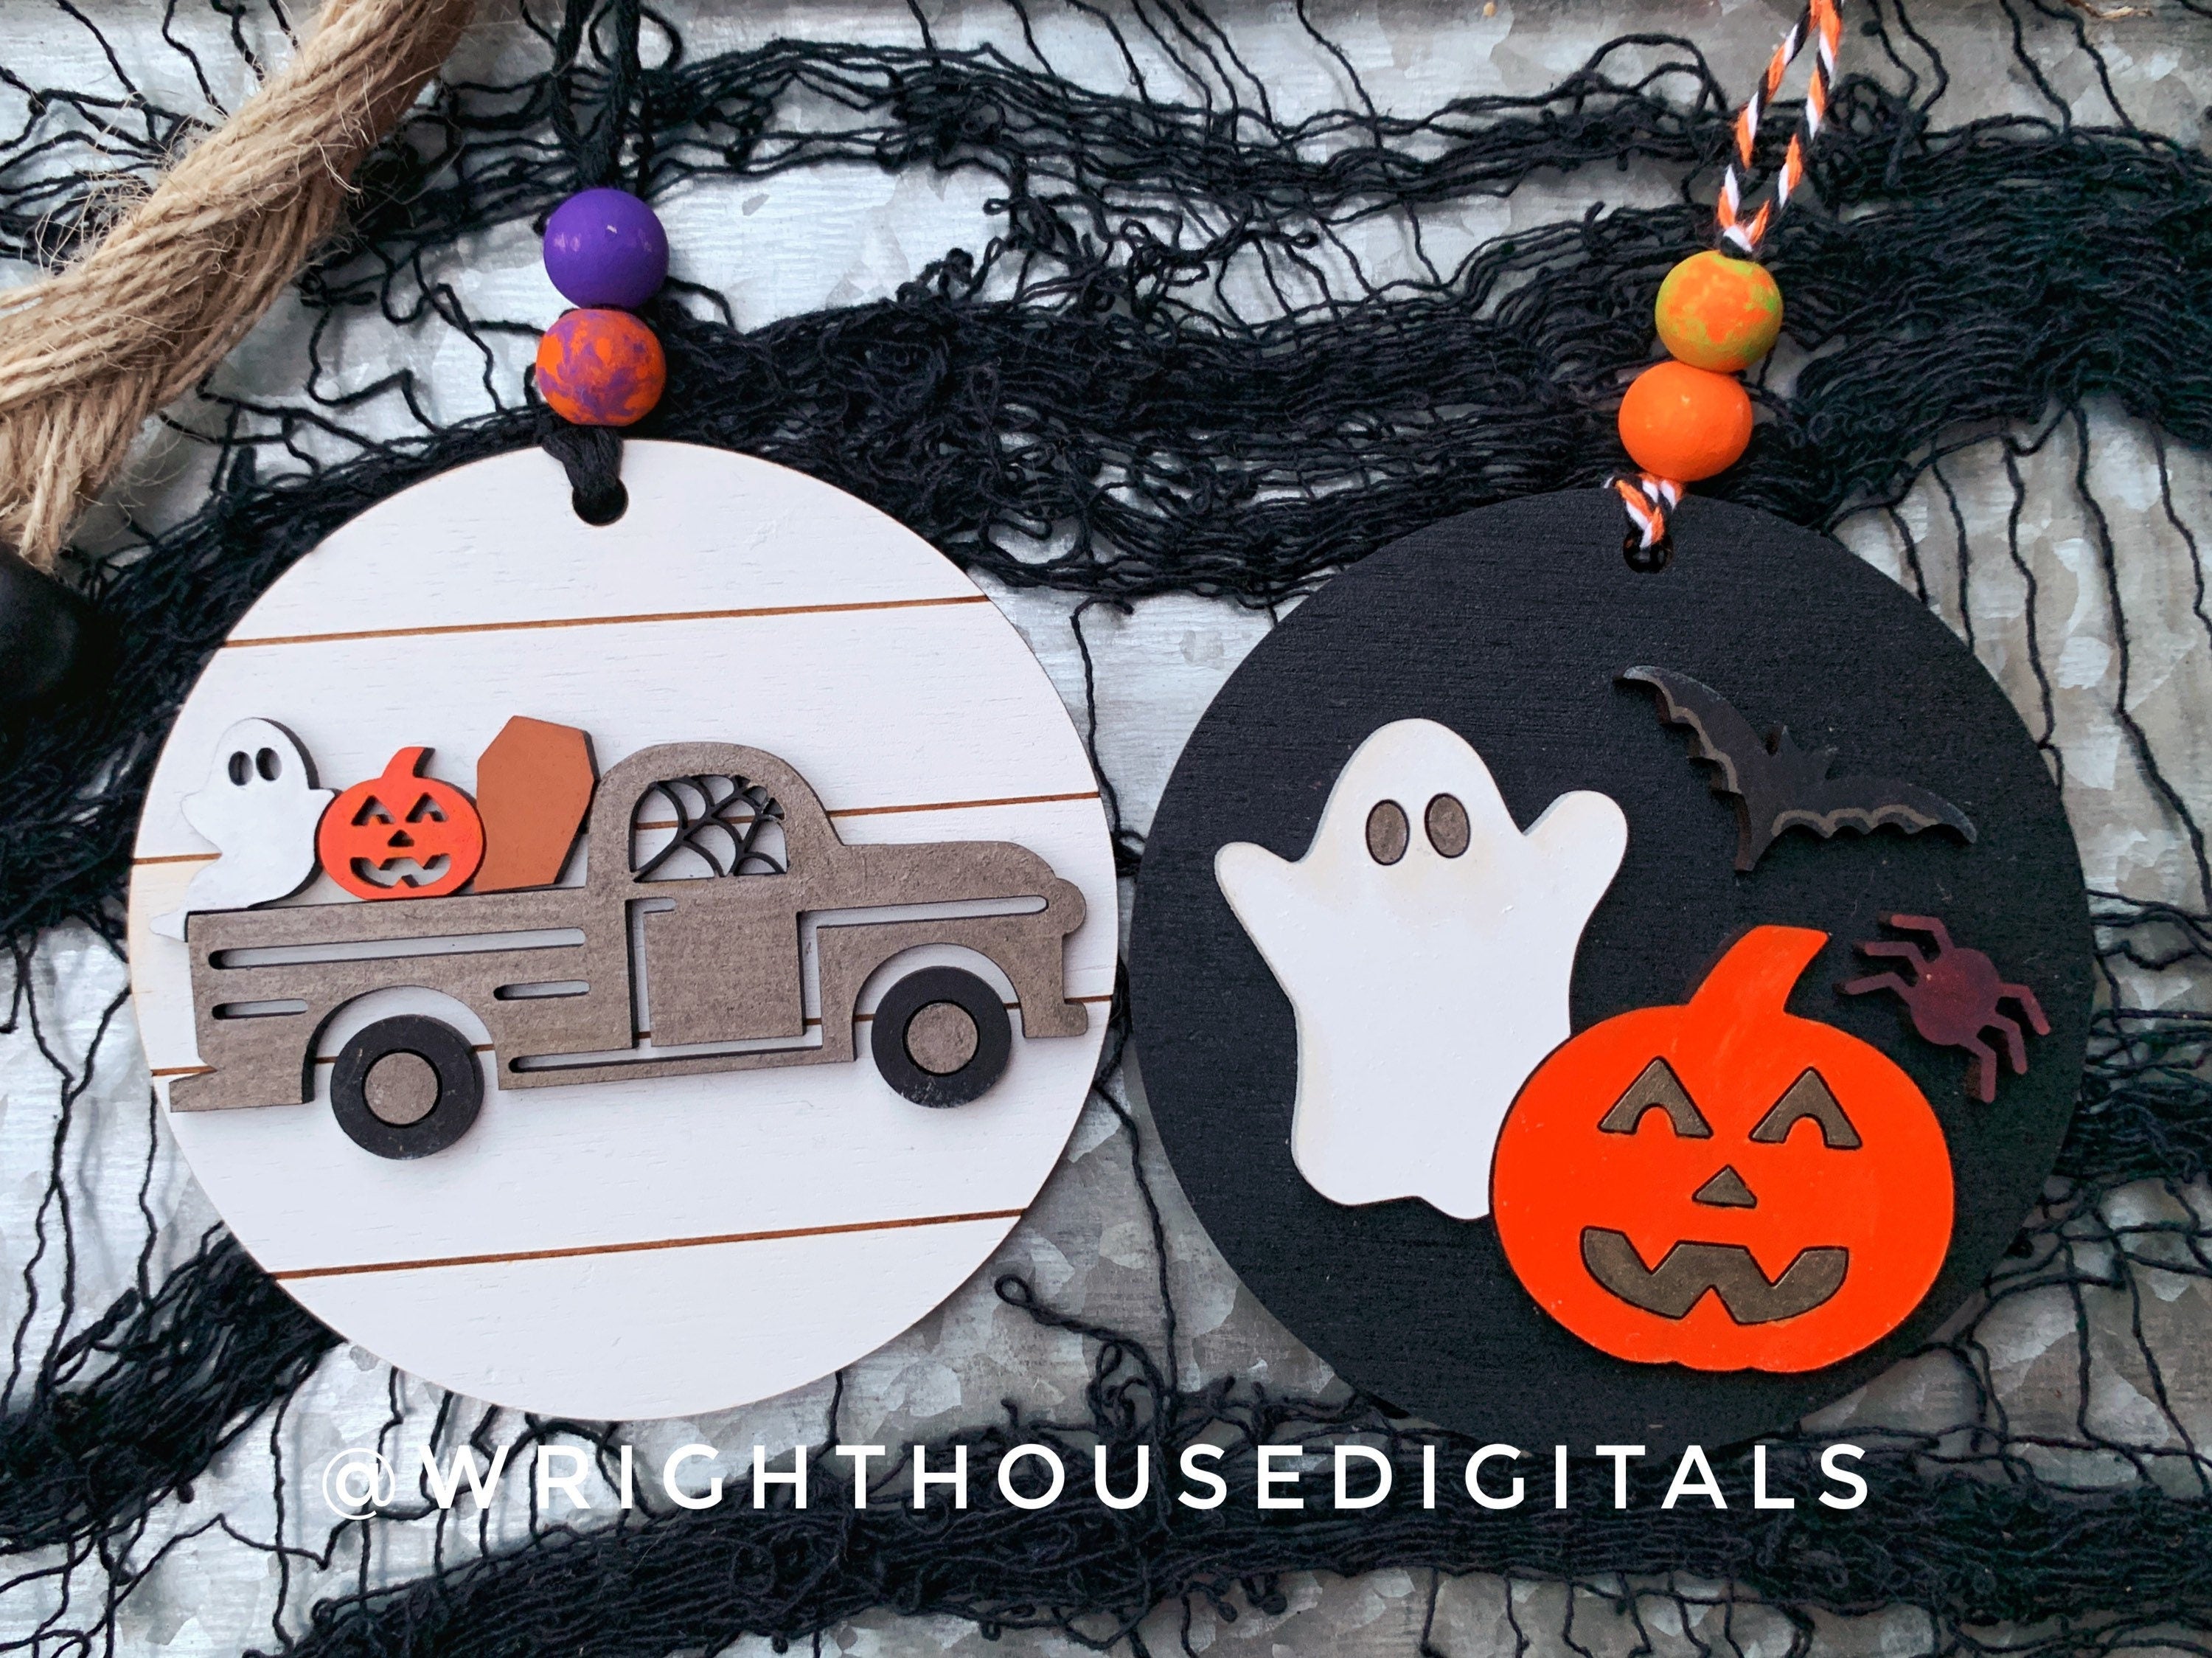 DIGITAL FILE - Halloween Icons - Vintage Truck, Ghost - Shiplap Style Doodle Ornaments - SVG Cut File For Glowforge - Cut Files For Lasers